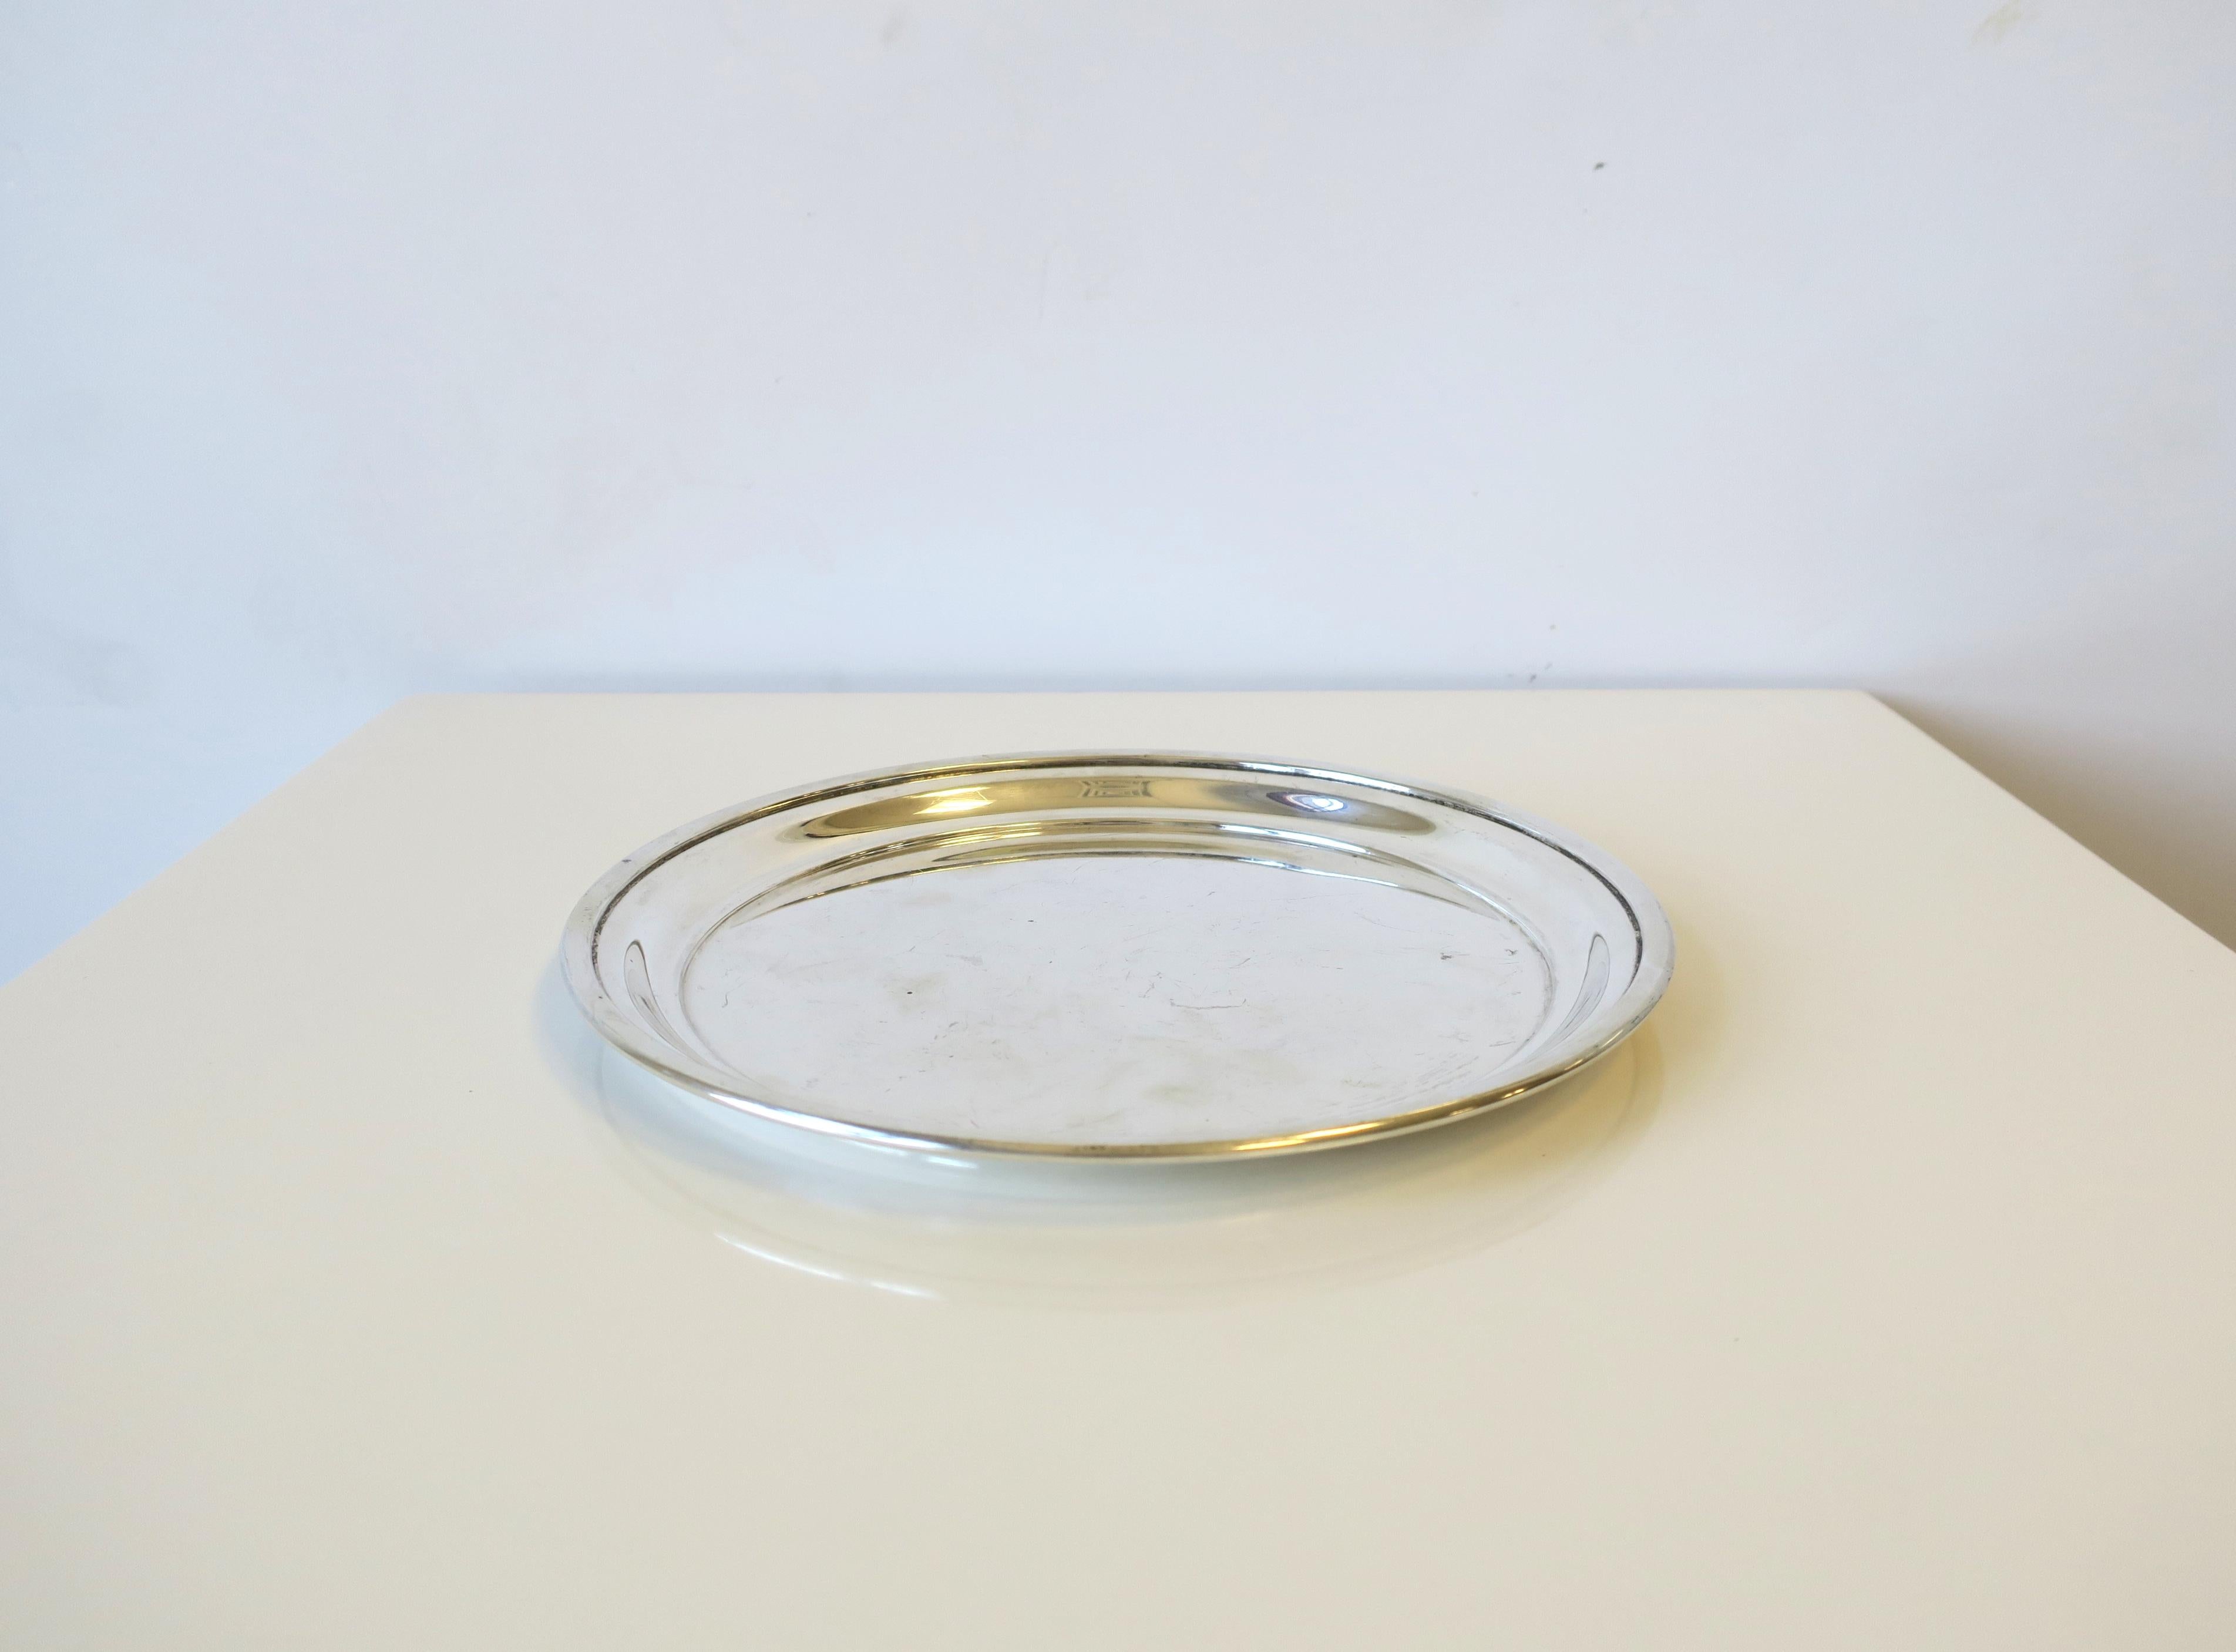 Cartier Sterling Silver Tray or Dish 3